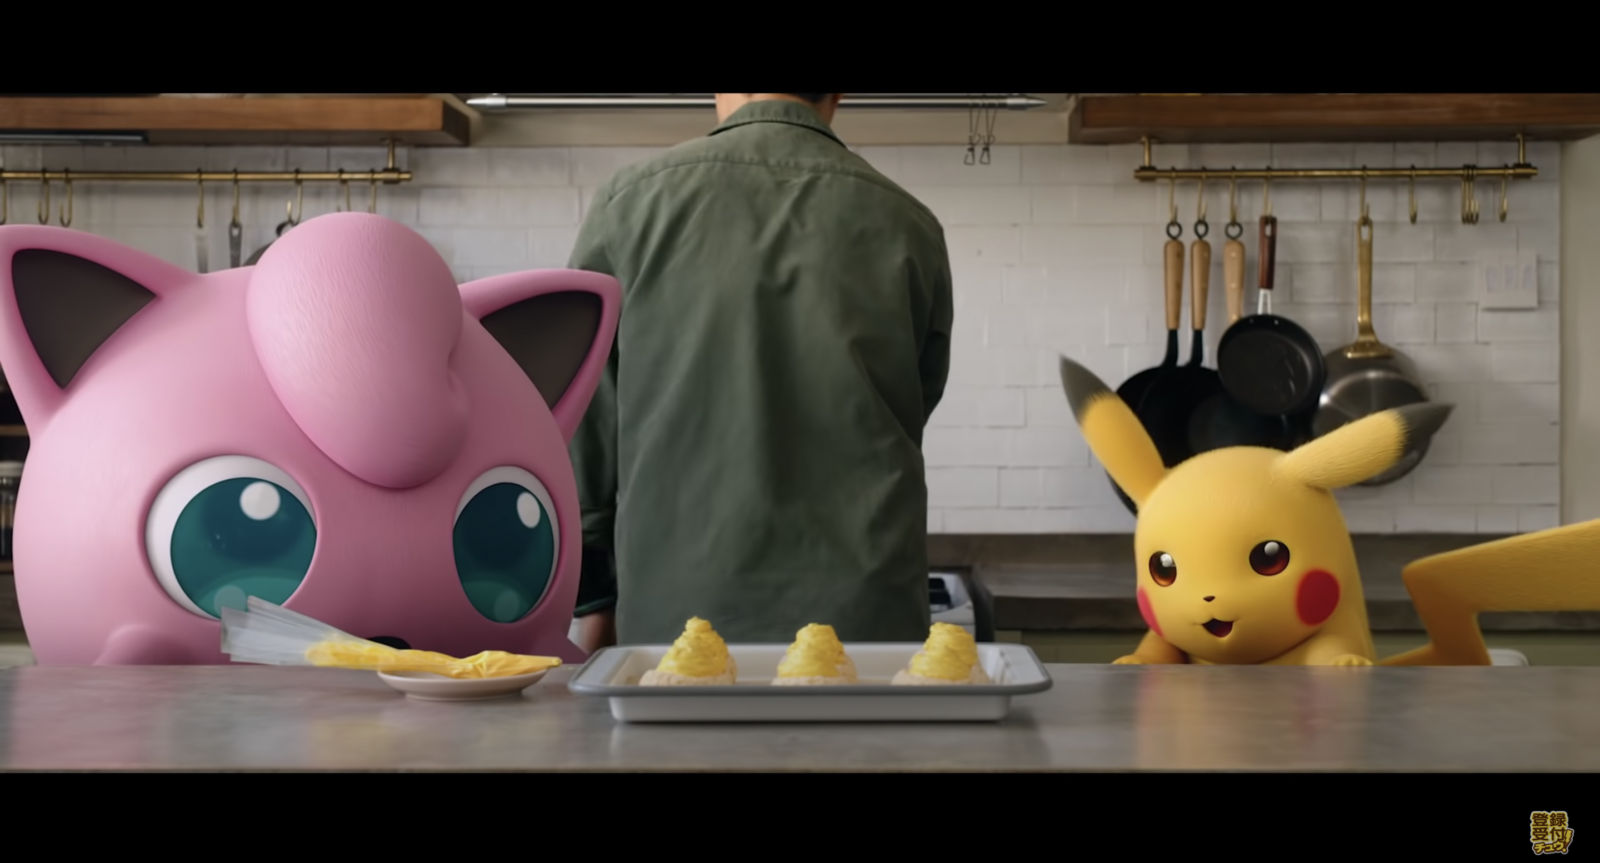 Pokémon releases YouTube cooking videos featuring Pikachu and Jigglypuff